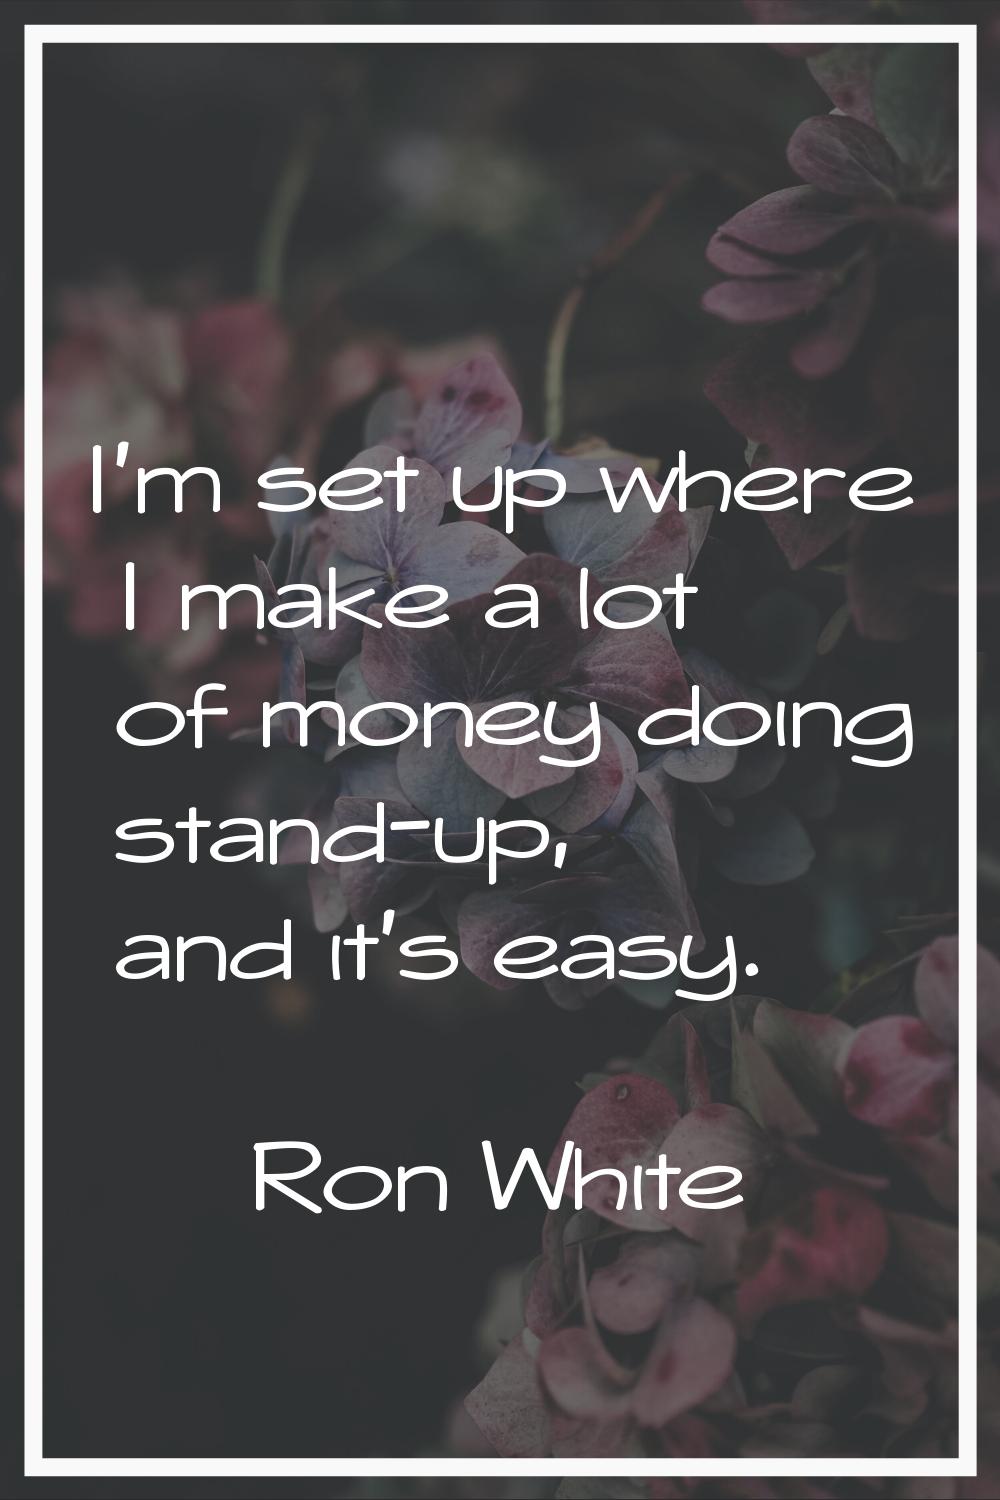 I'm set up where I make a lot of money doing stand-up, and it's easy.